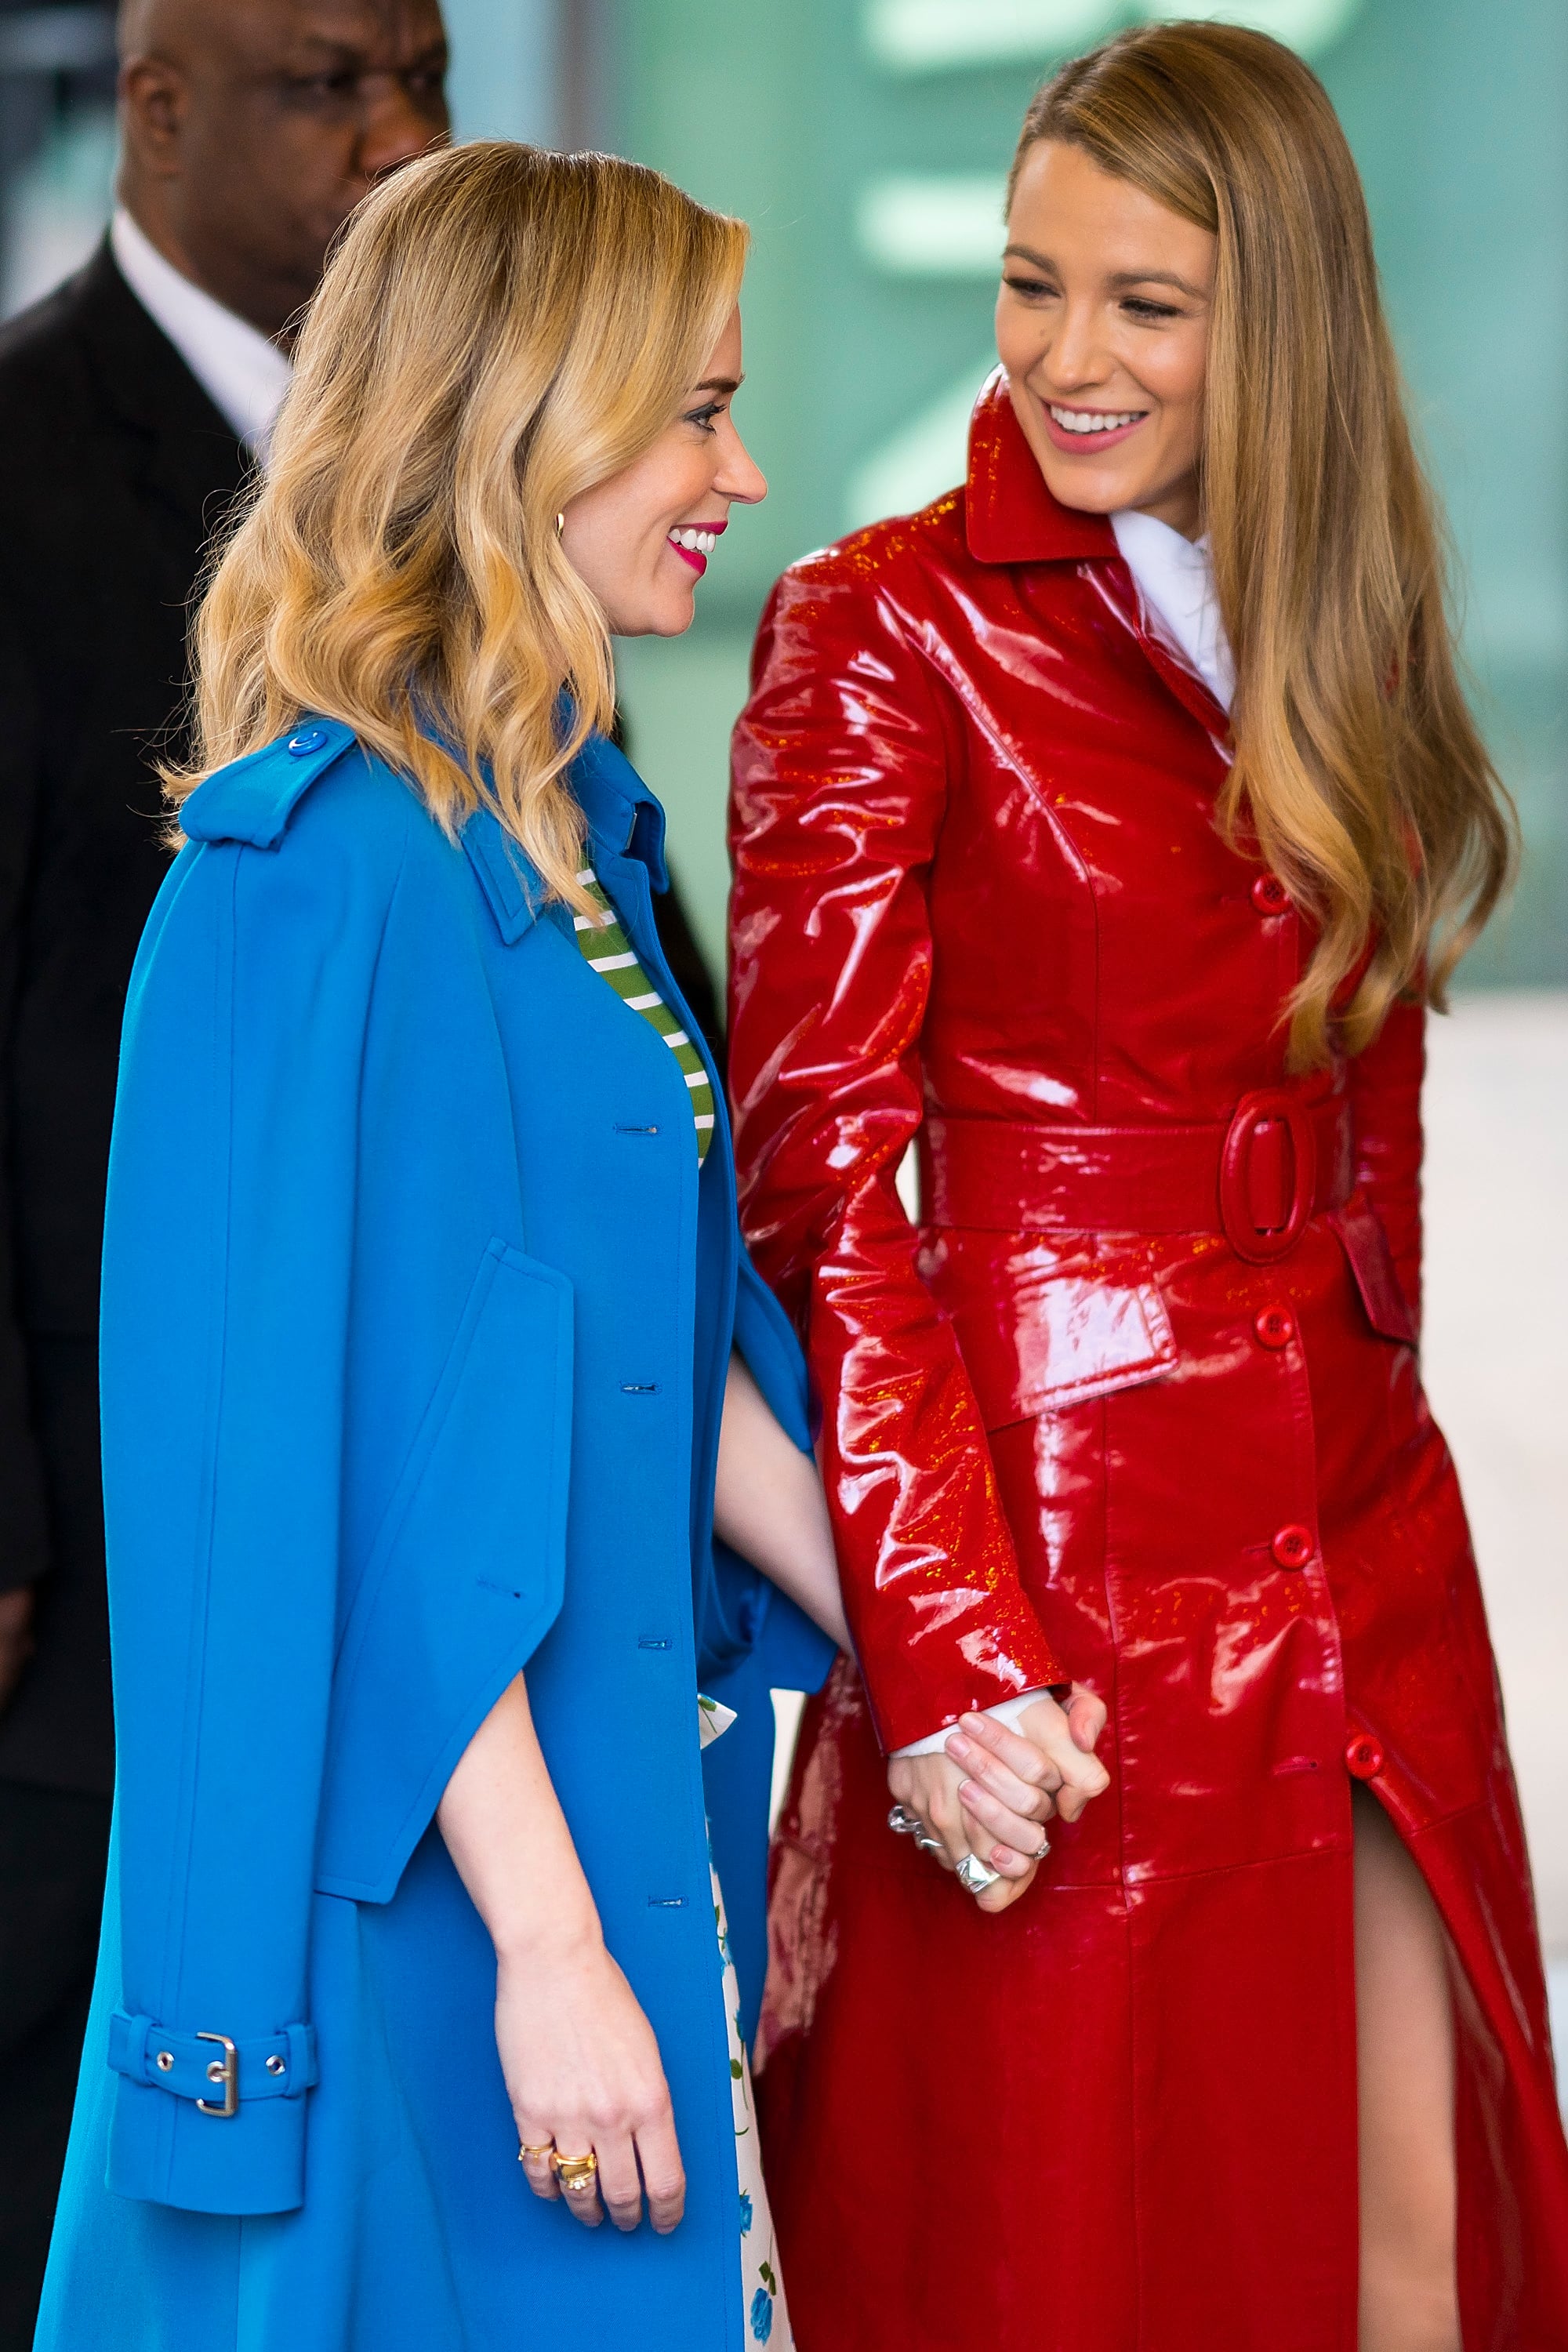 This week on the red carpet: Blake Lively, Emily Blunt, Léa